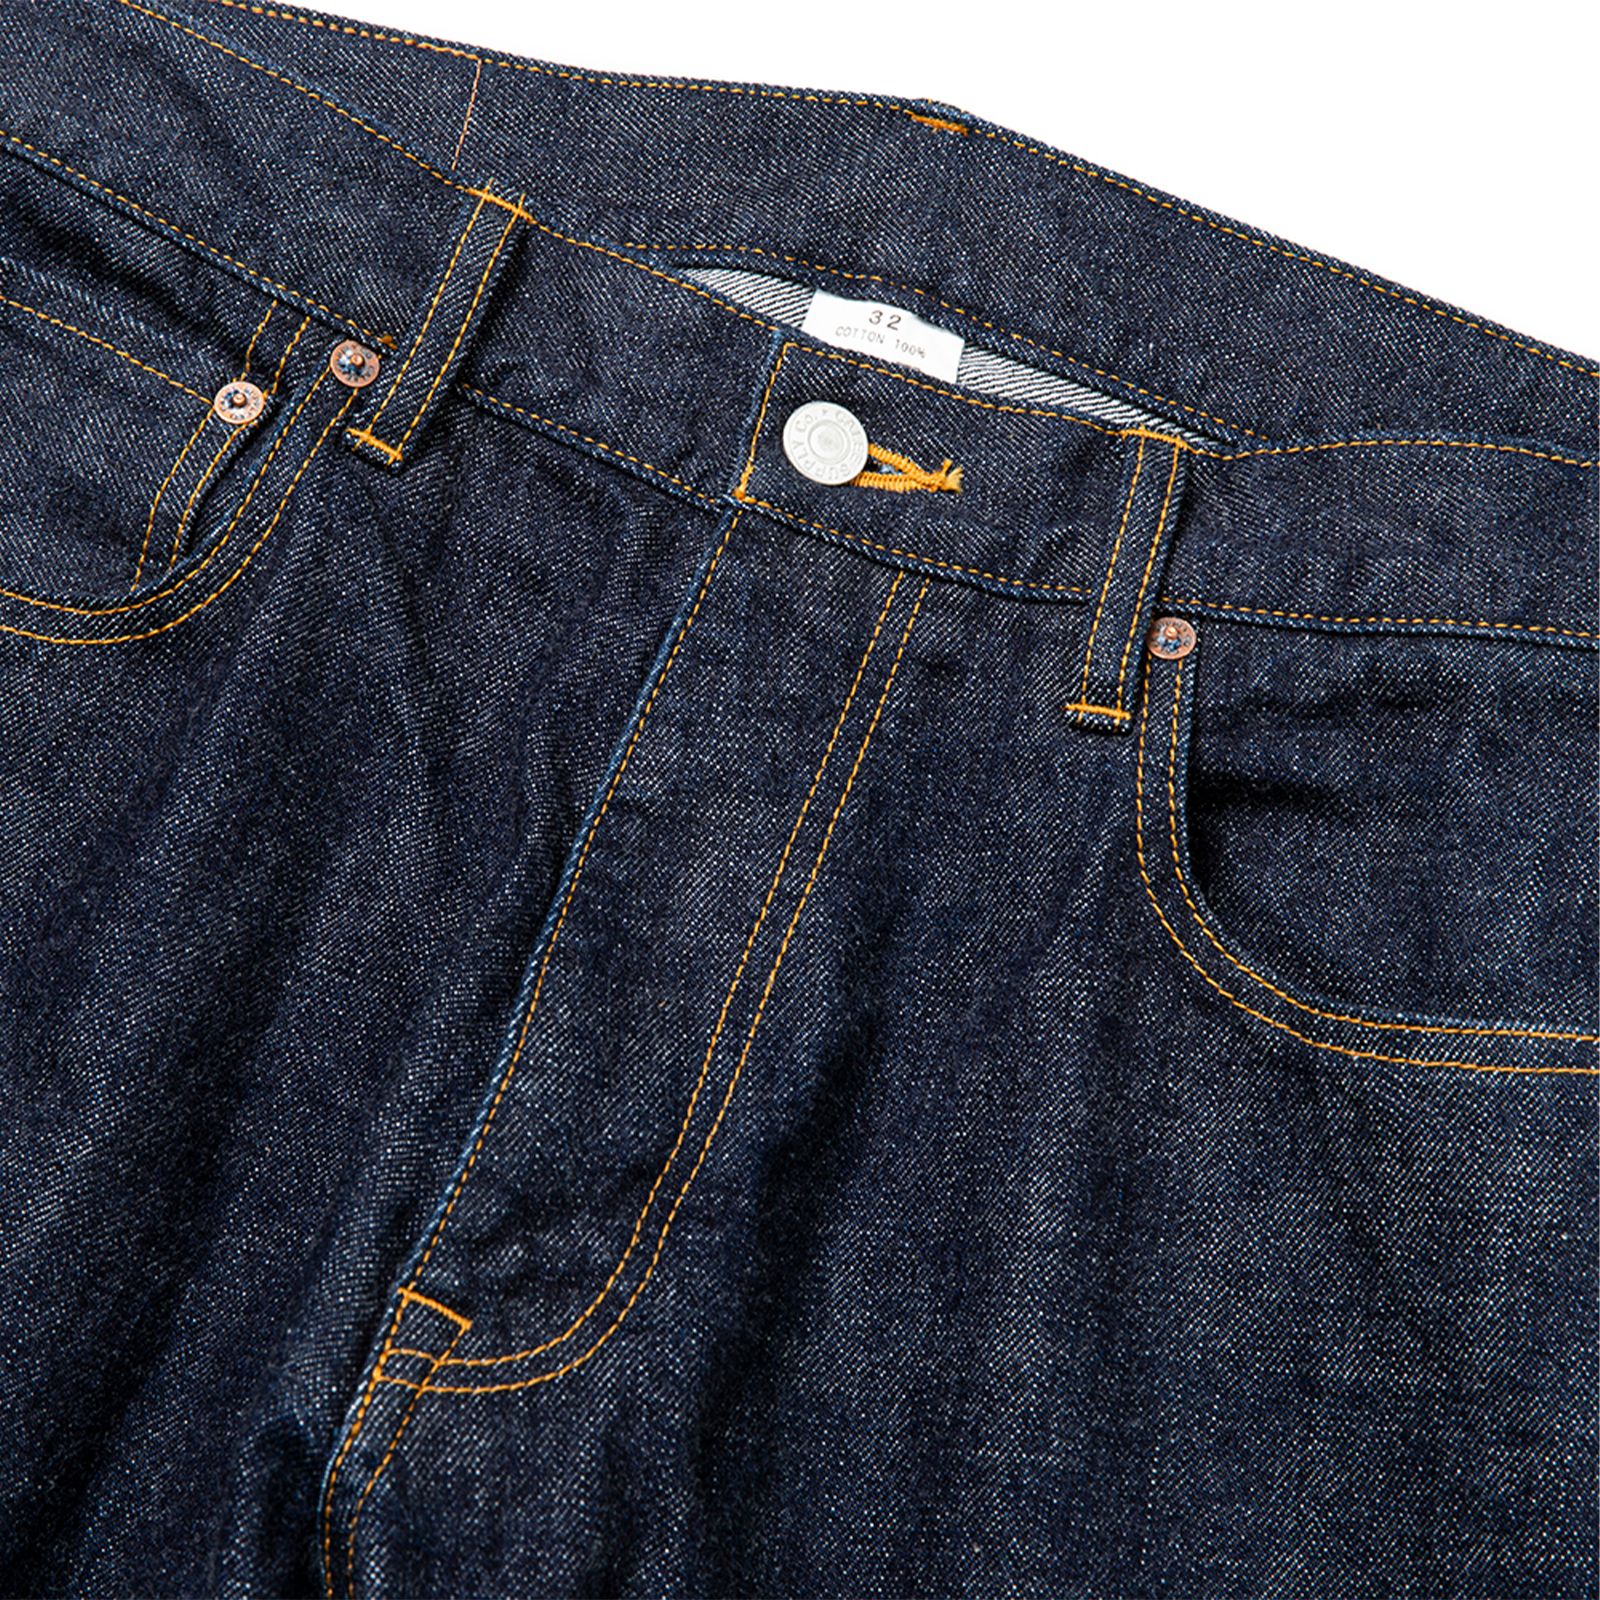 CALEE - 【ラスト1点 32 】Vintage reproduct wide silhouette denim ...